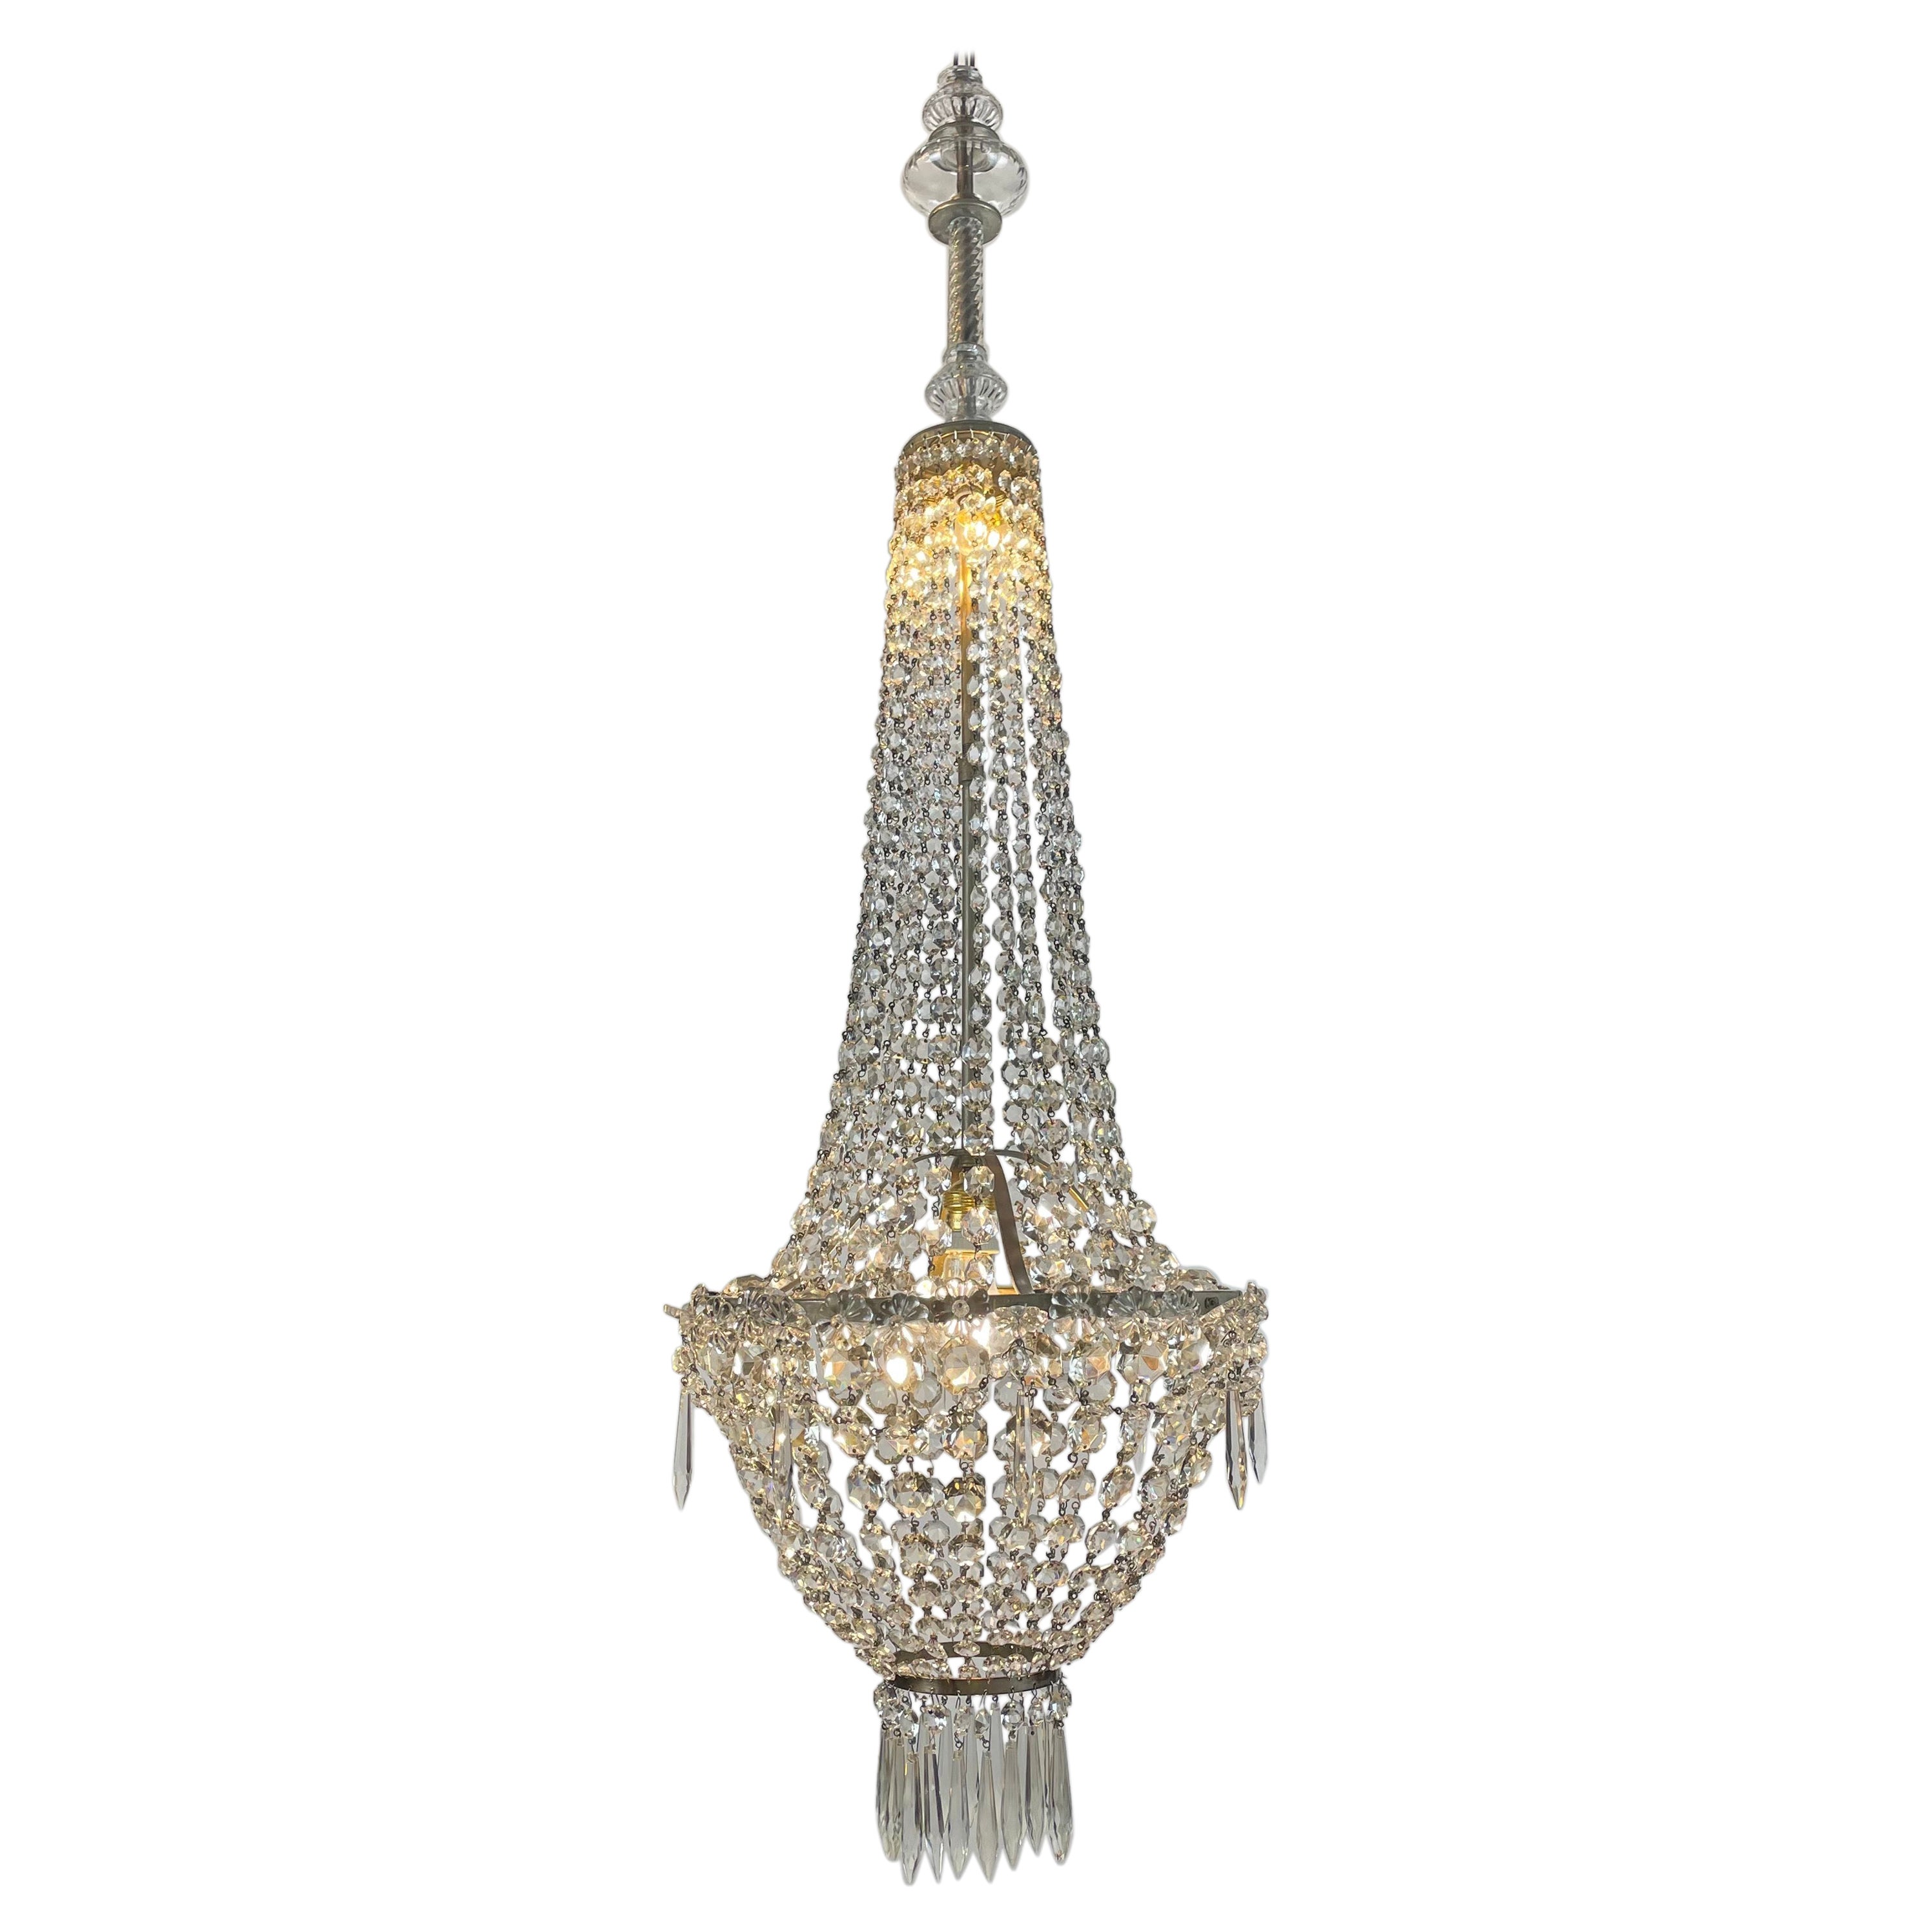 An early-20th century Empire style beaded crystal basket chandelier with a high central stem, a classical circular crystal structure, three E14 lights inside, in the upper section, and one single E27 light bulb in the lower part, at the bottom,